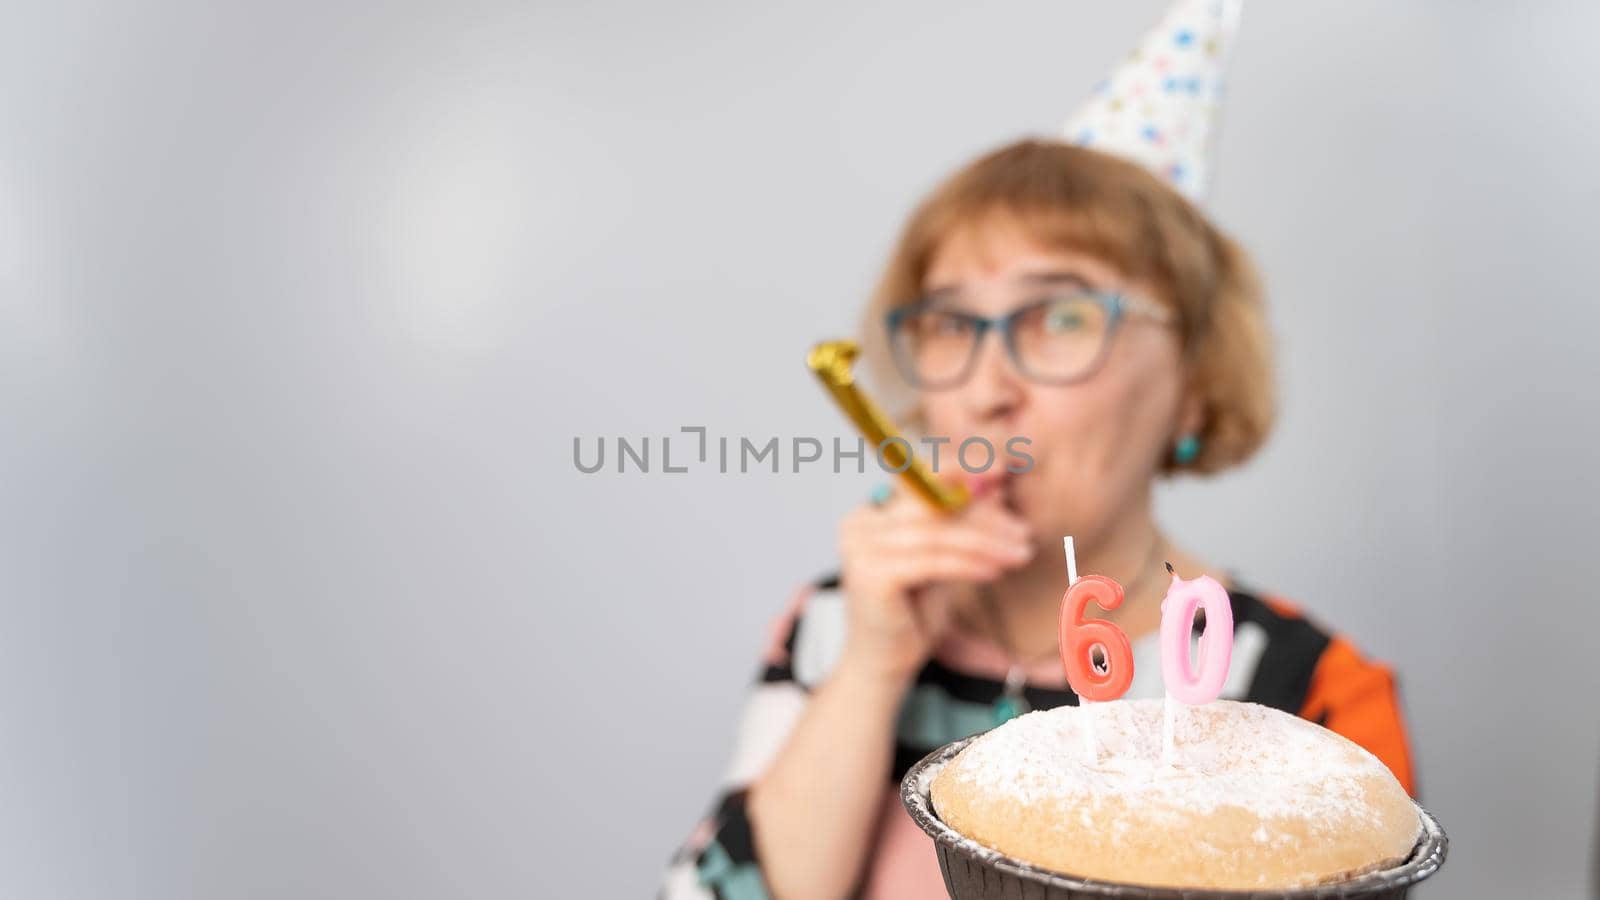 A portrait of a smiling elderly woman in a festive cap holding a cake with candles in the form of the number 60. Anniversary.